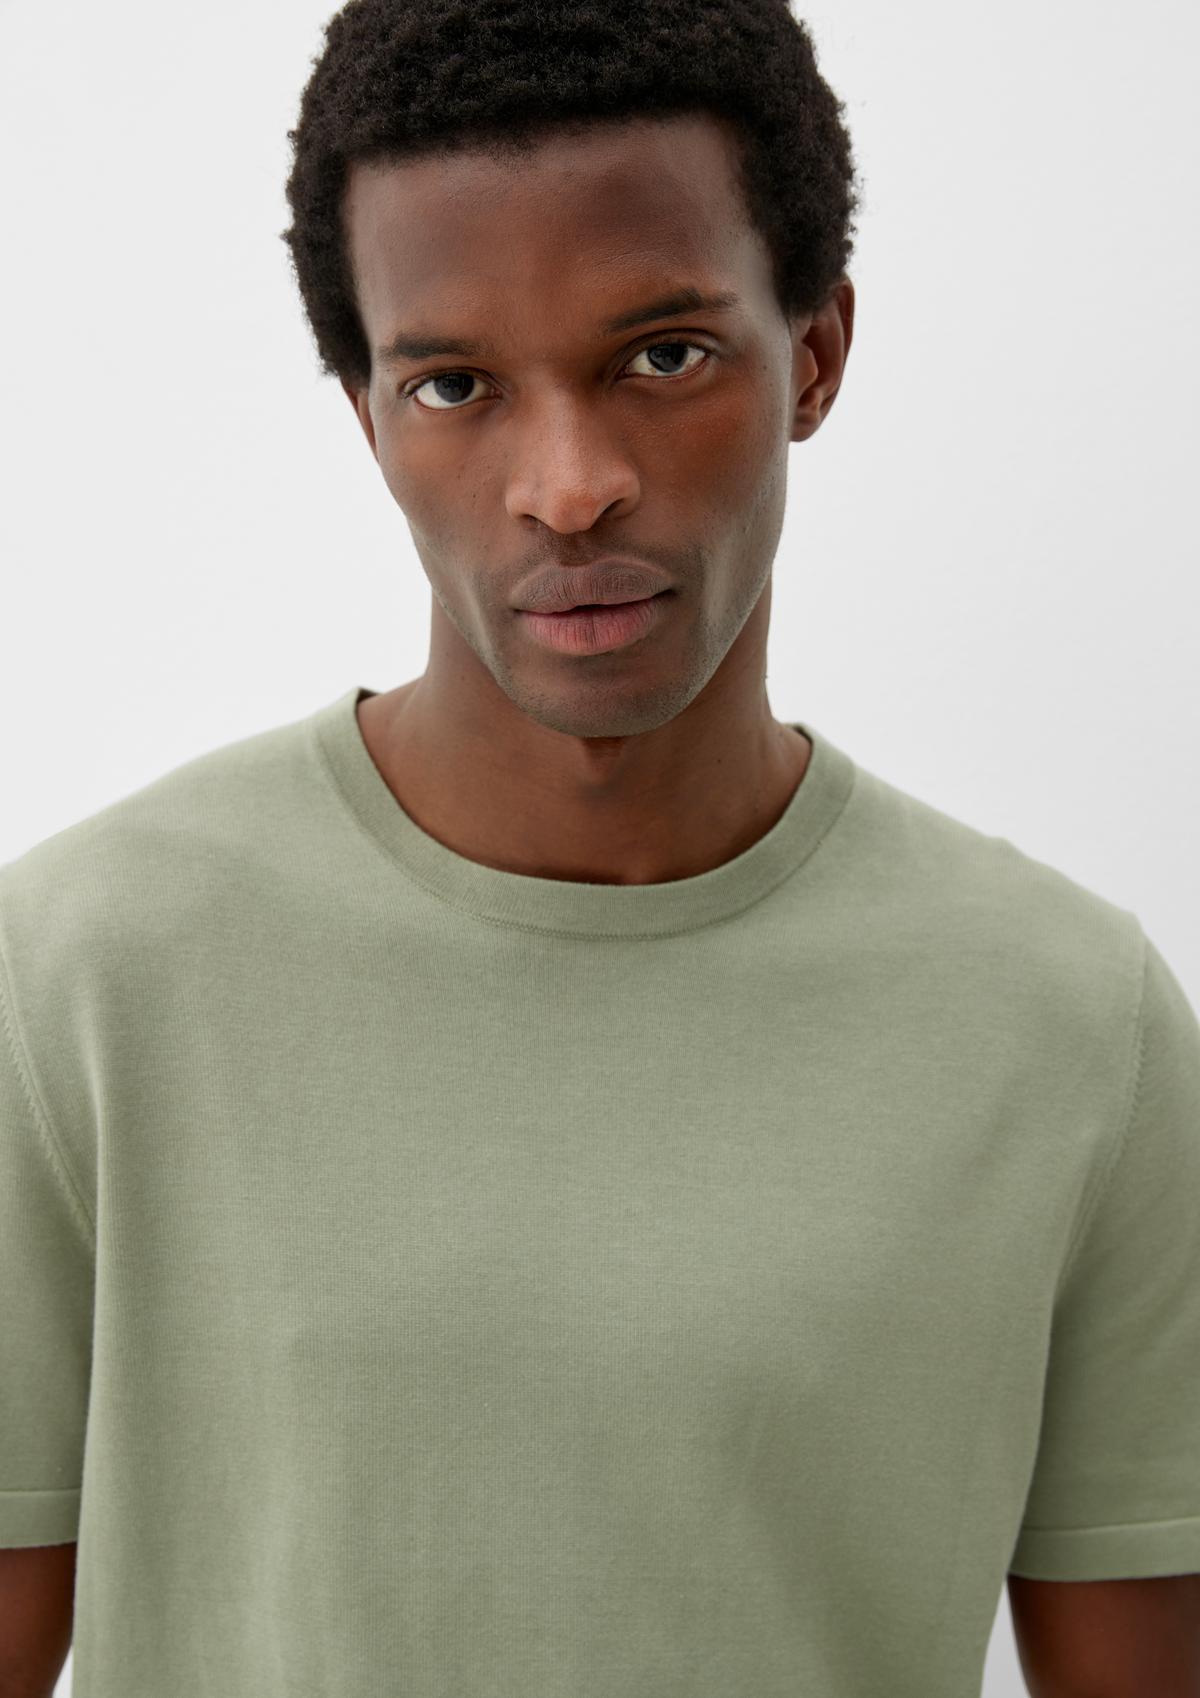 Knitted top with a crew - neck light olive